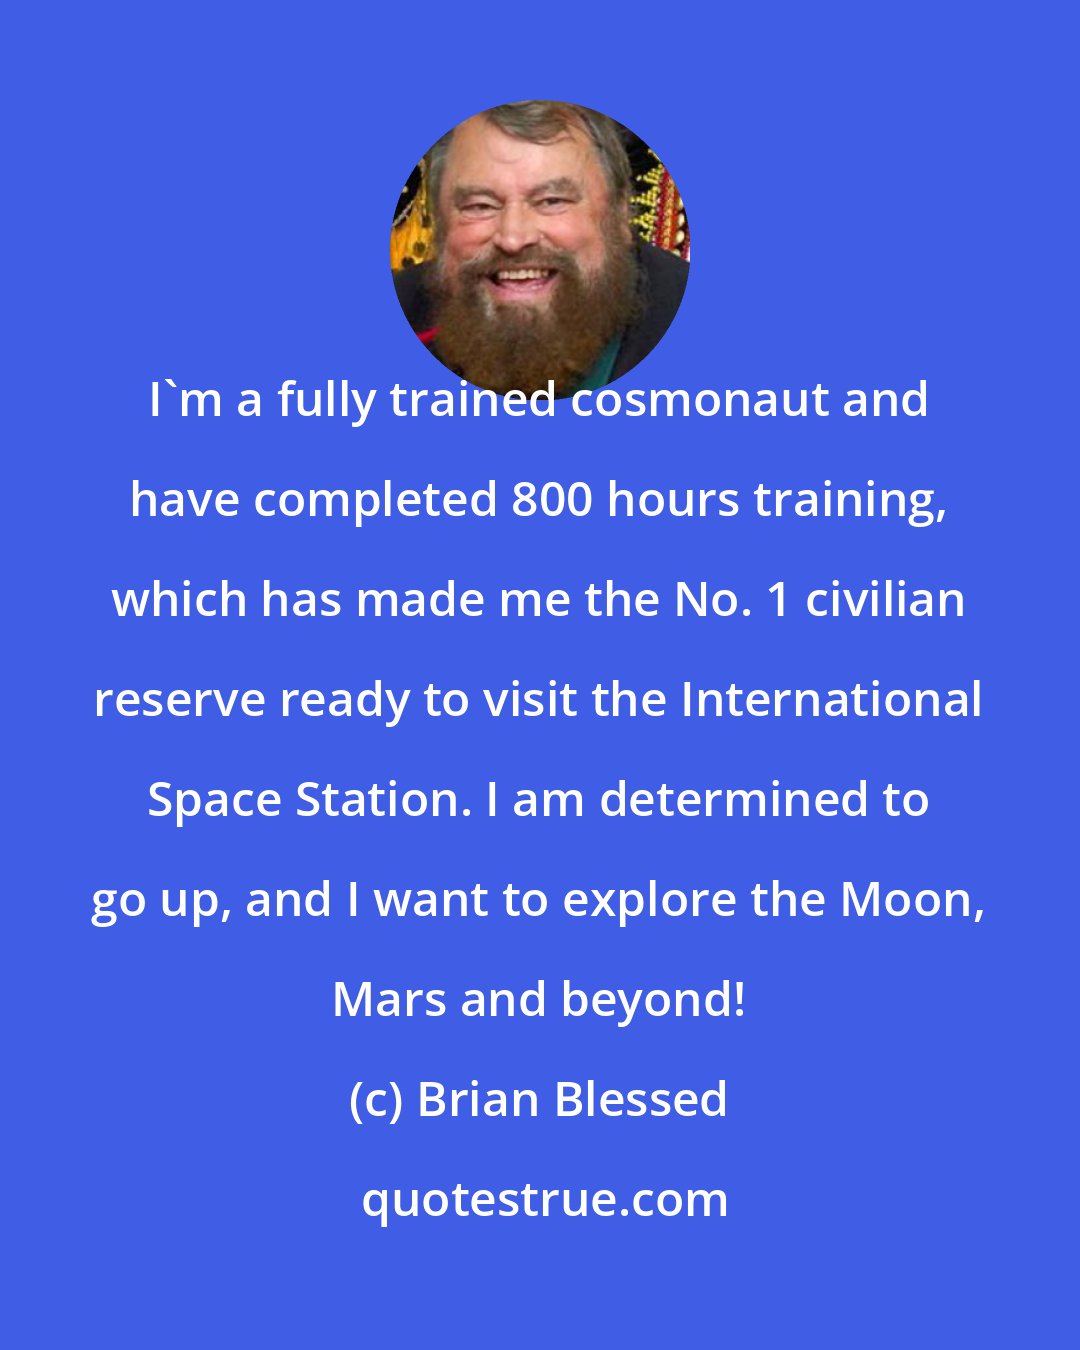 Brian Blessed: I'm a fully trained cosmonaut and have completed 800 hours training, which has made me the No. 1 civilian reserve ready to visit the International Space Station. I am determined to go up, and I want to explore the Moon, Mars and beyond!